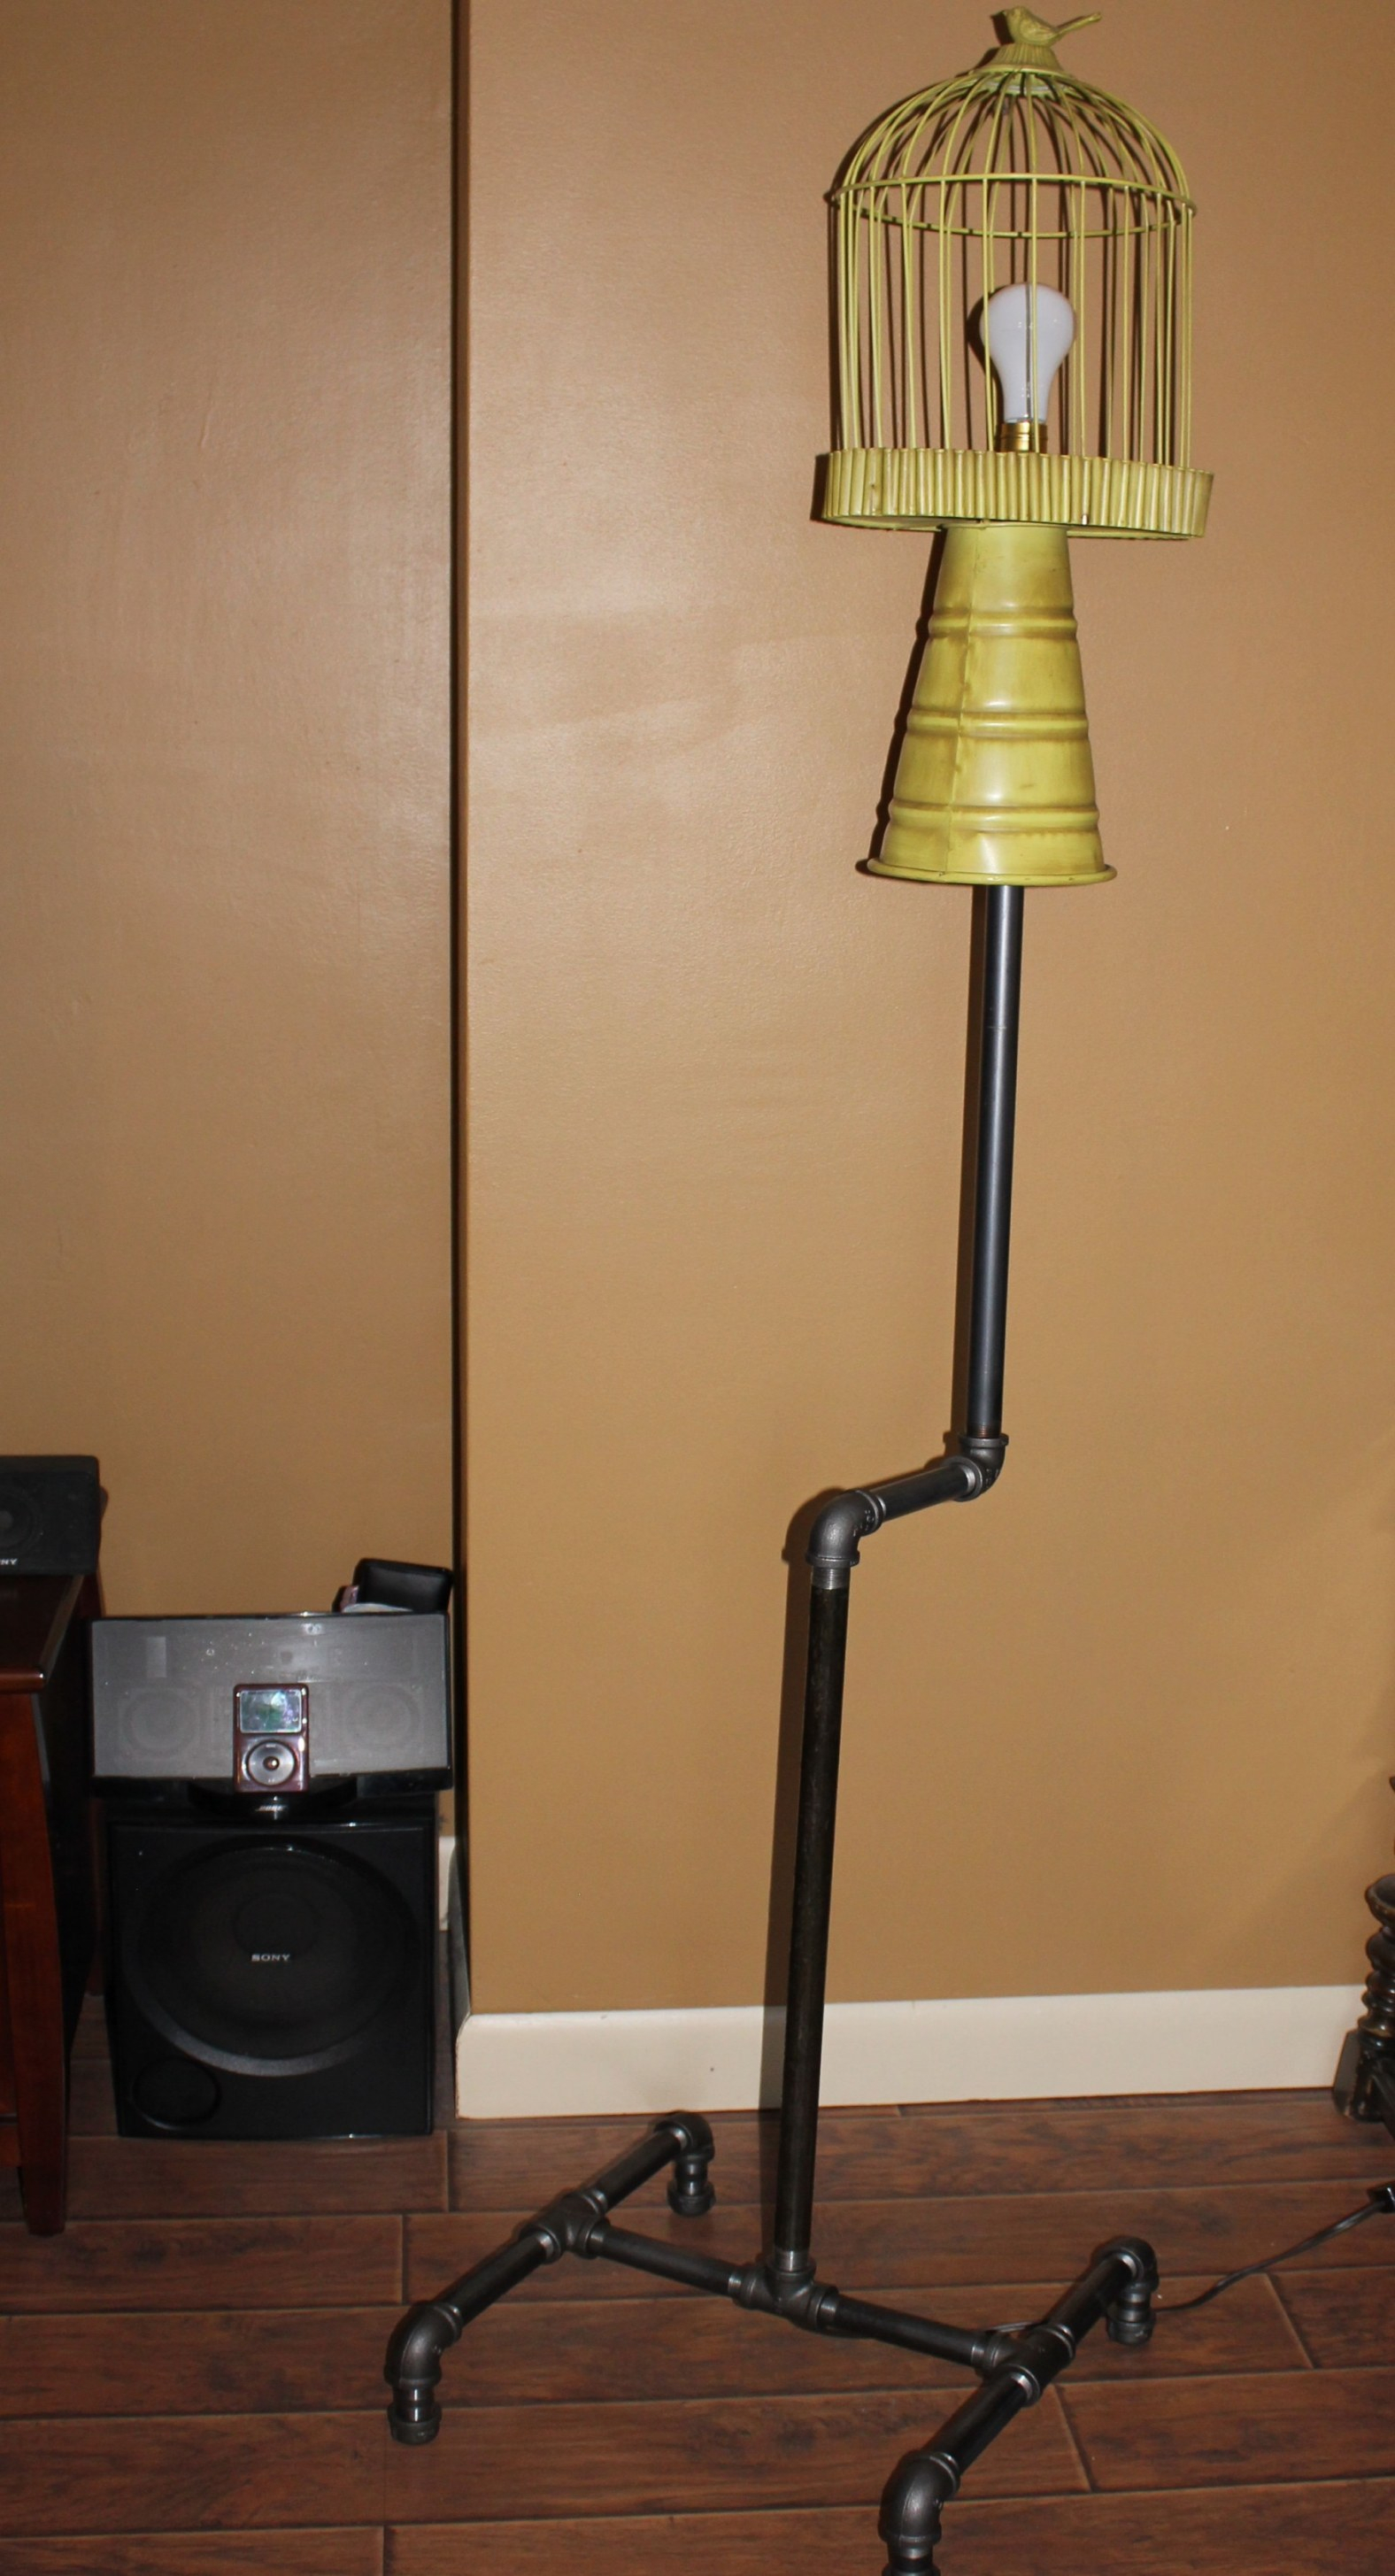 Diy Pipe Light Fixture Agha Industrial Floor Lamp Agha pertaining to dimensions 1576 X 2910